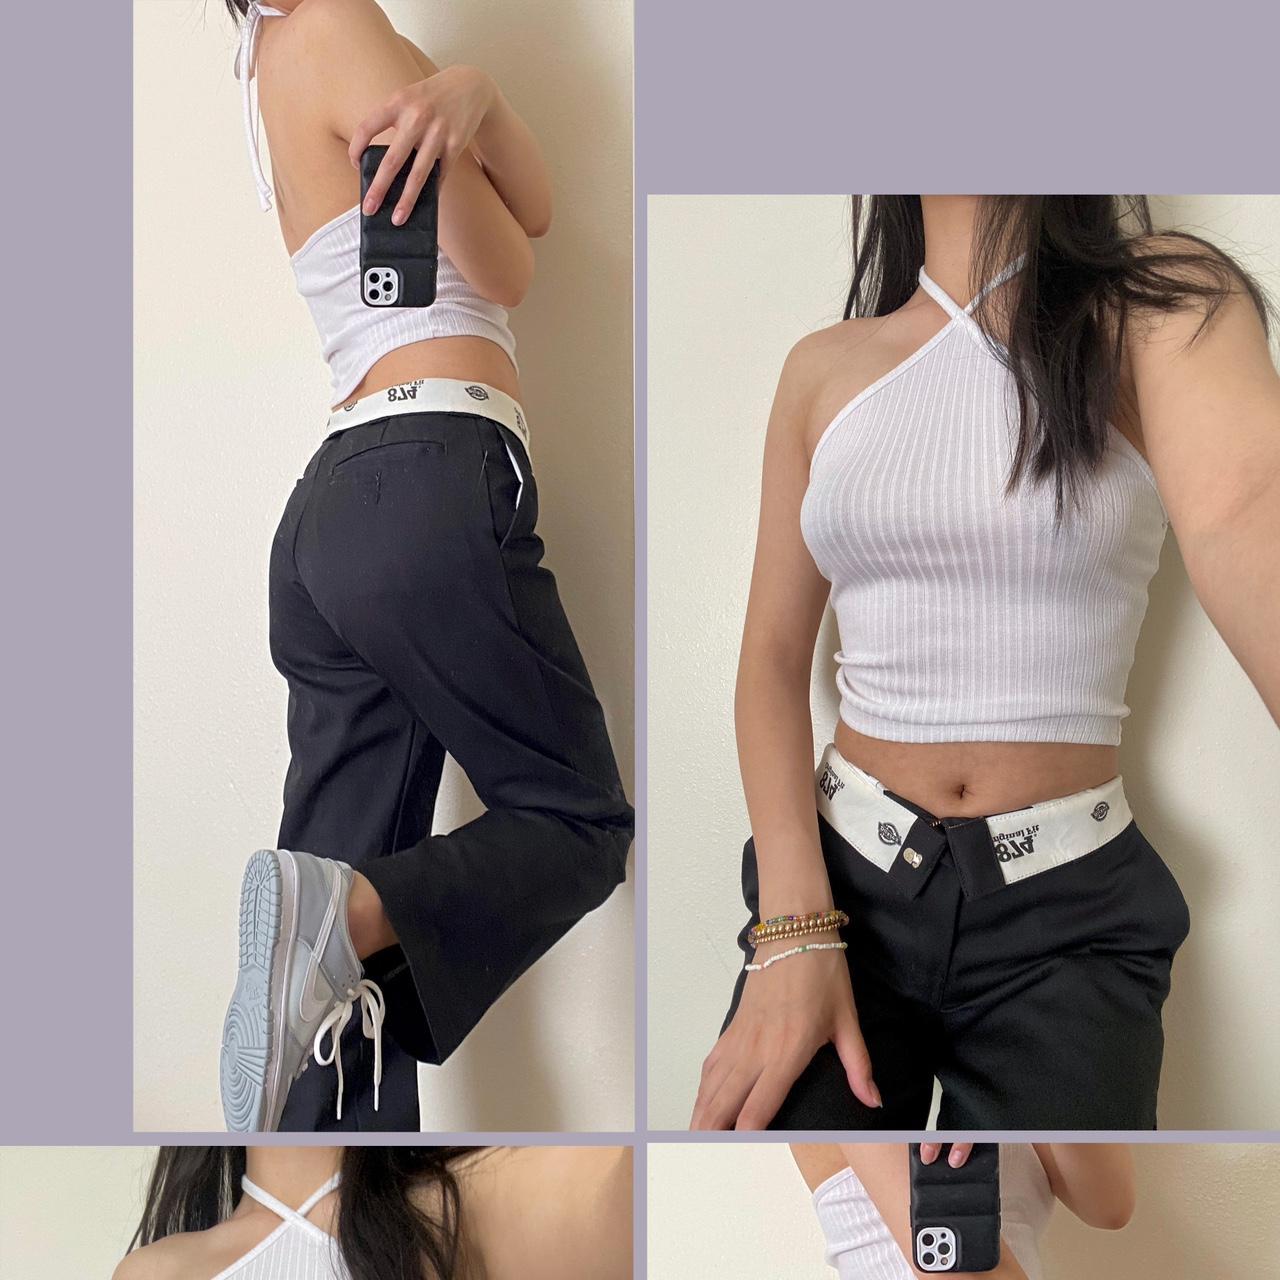 Find Cheap, Fashionable and Slimming halter girdle 